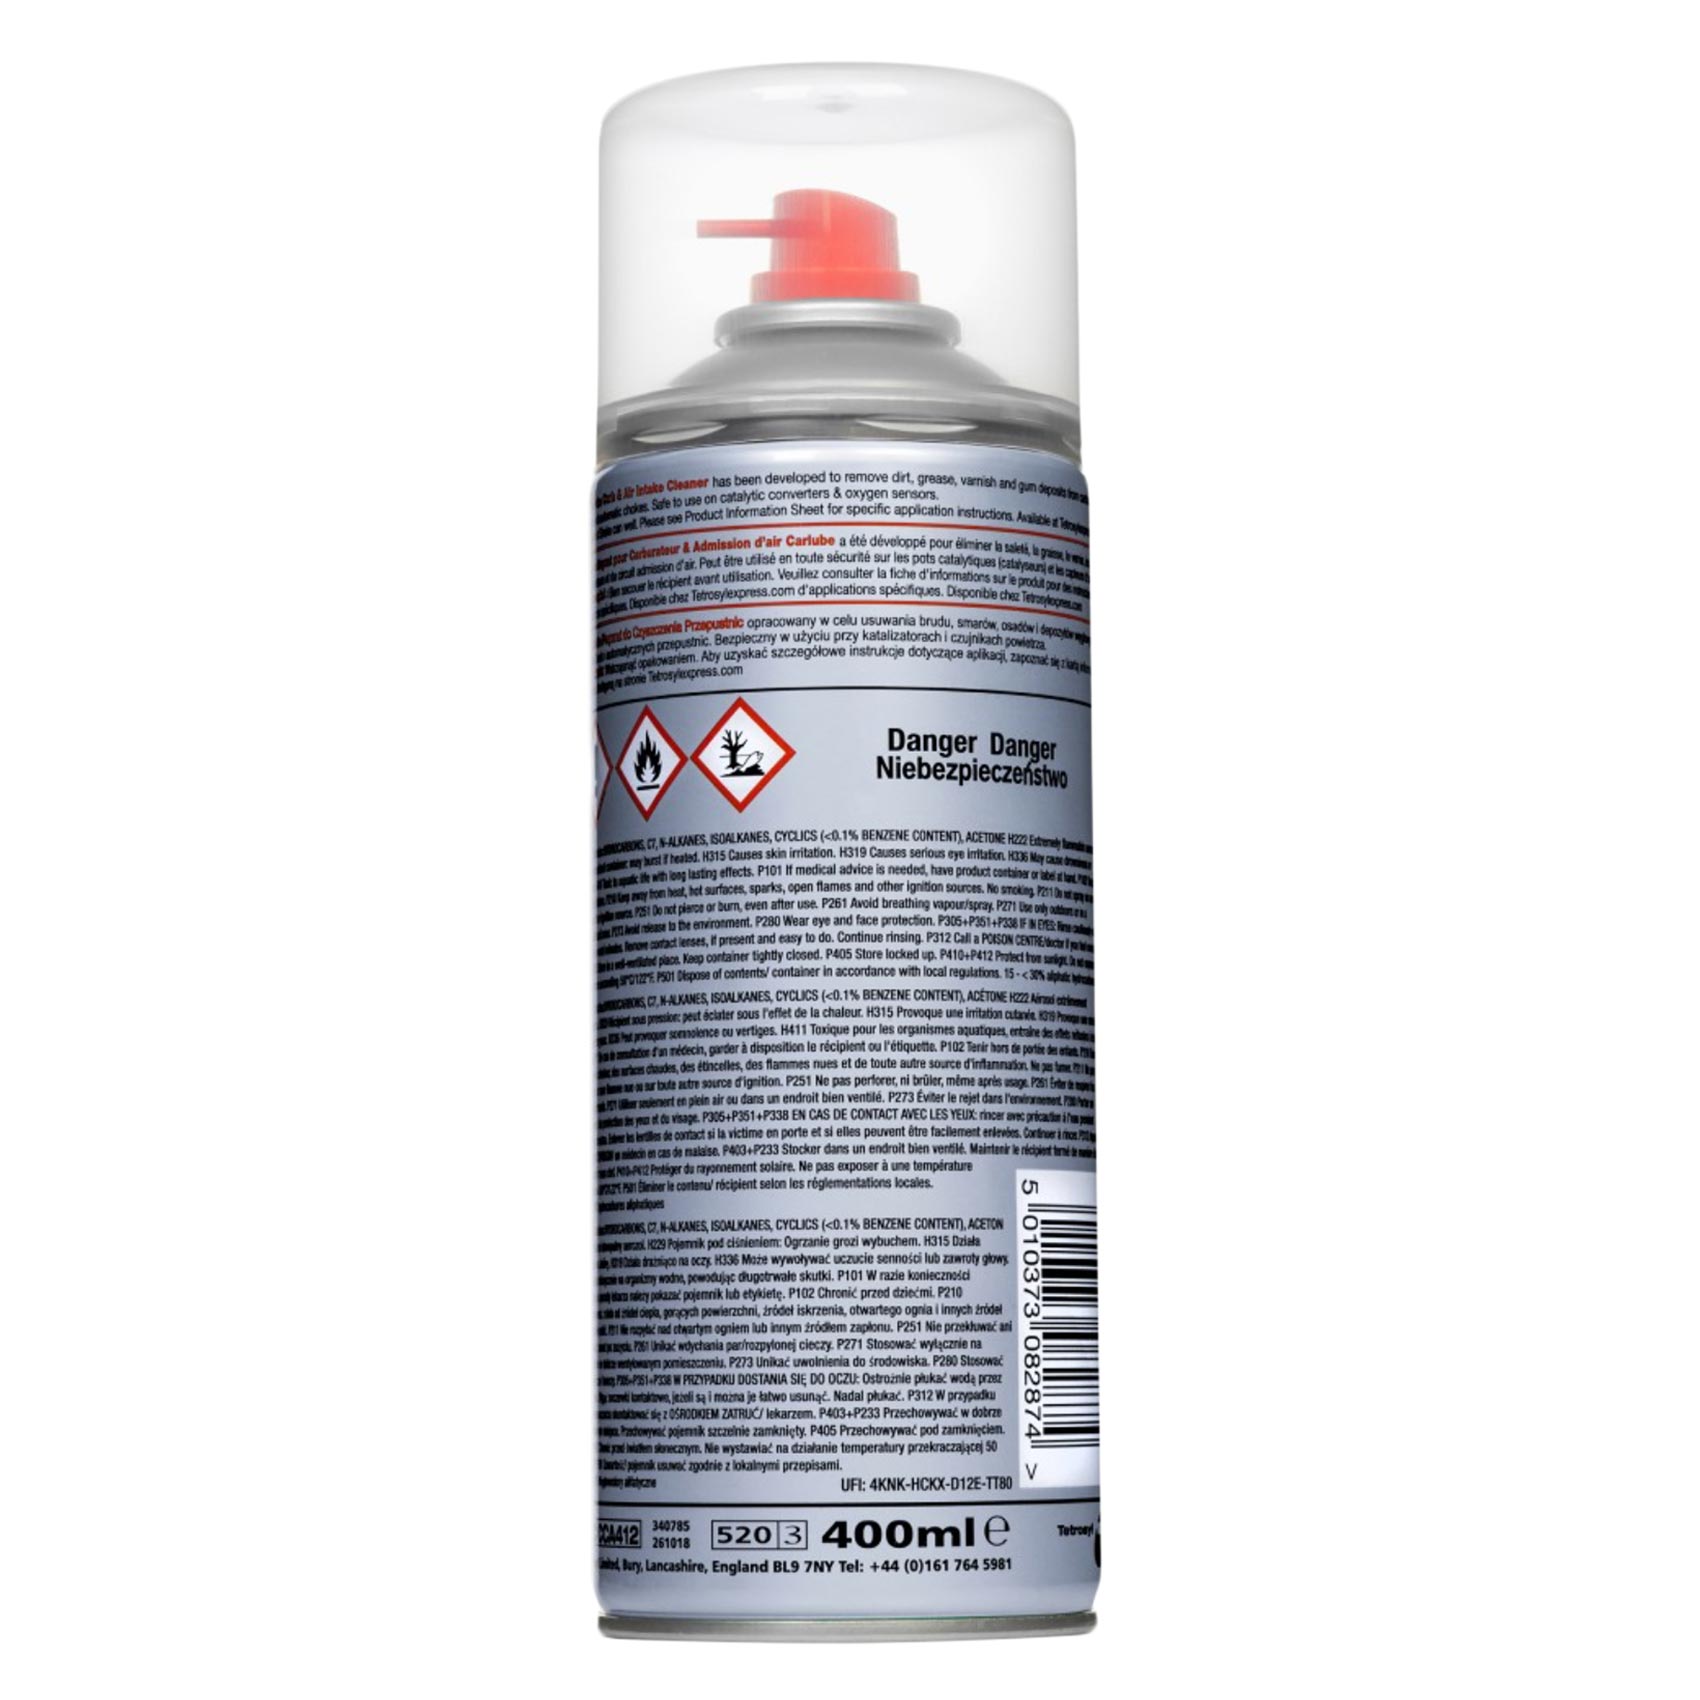 Carlube Carb And Air Intake Cleaner Spray 400ml